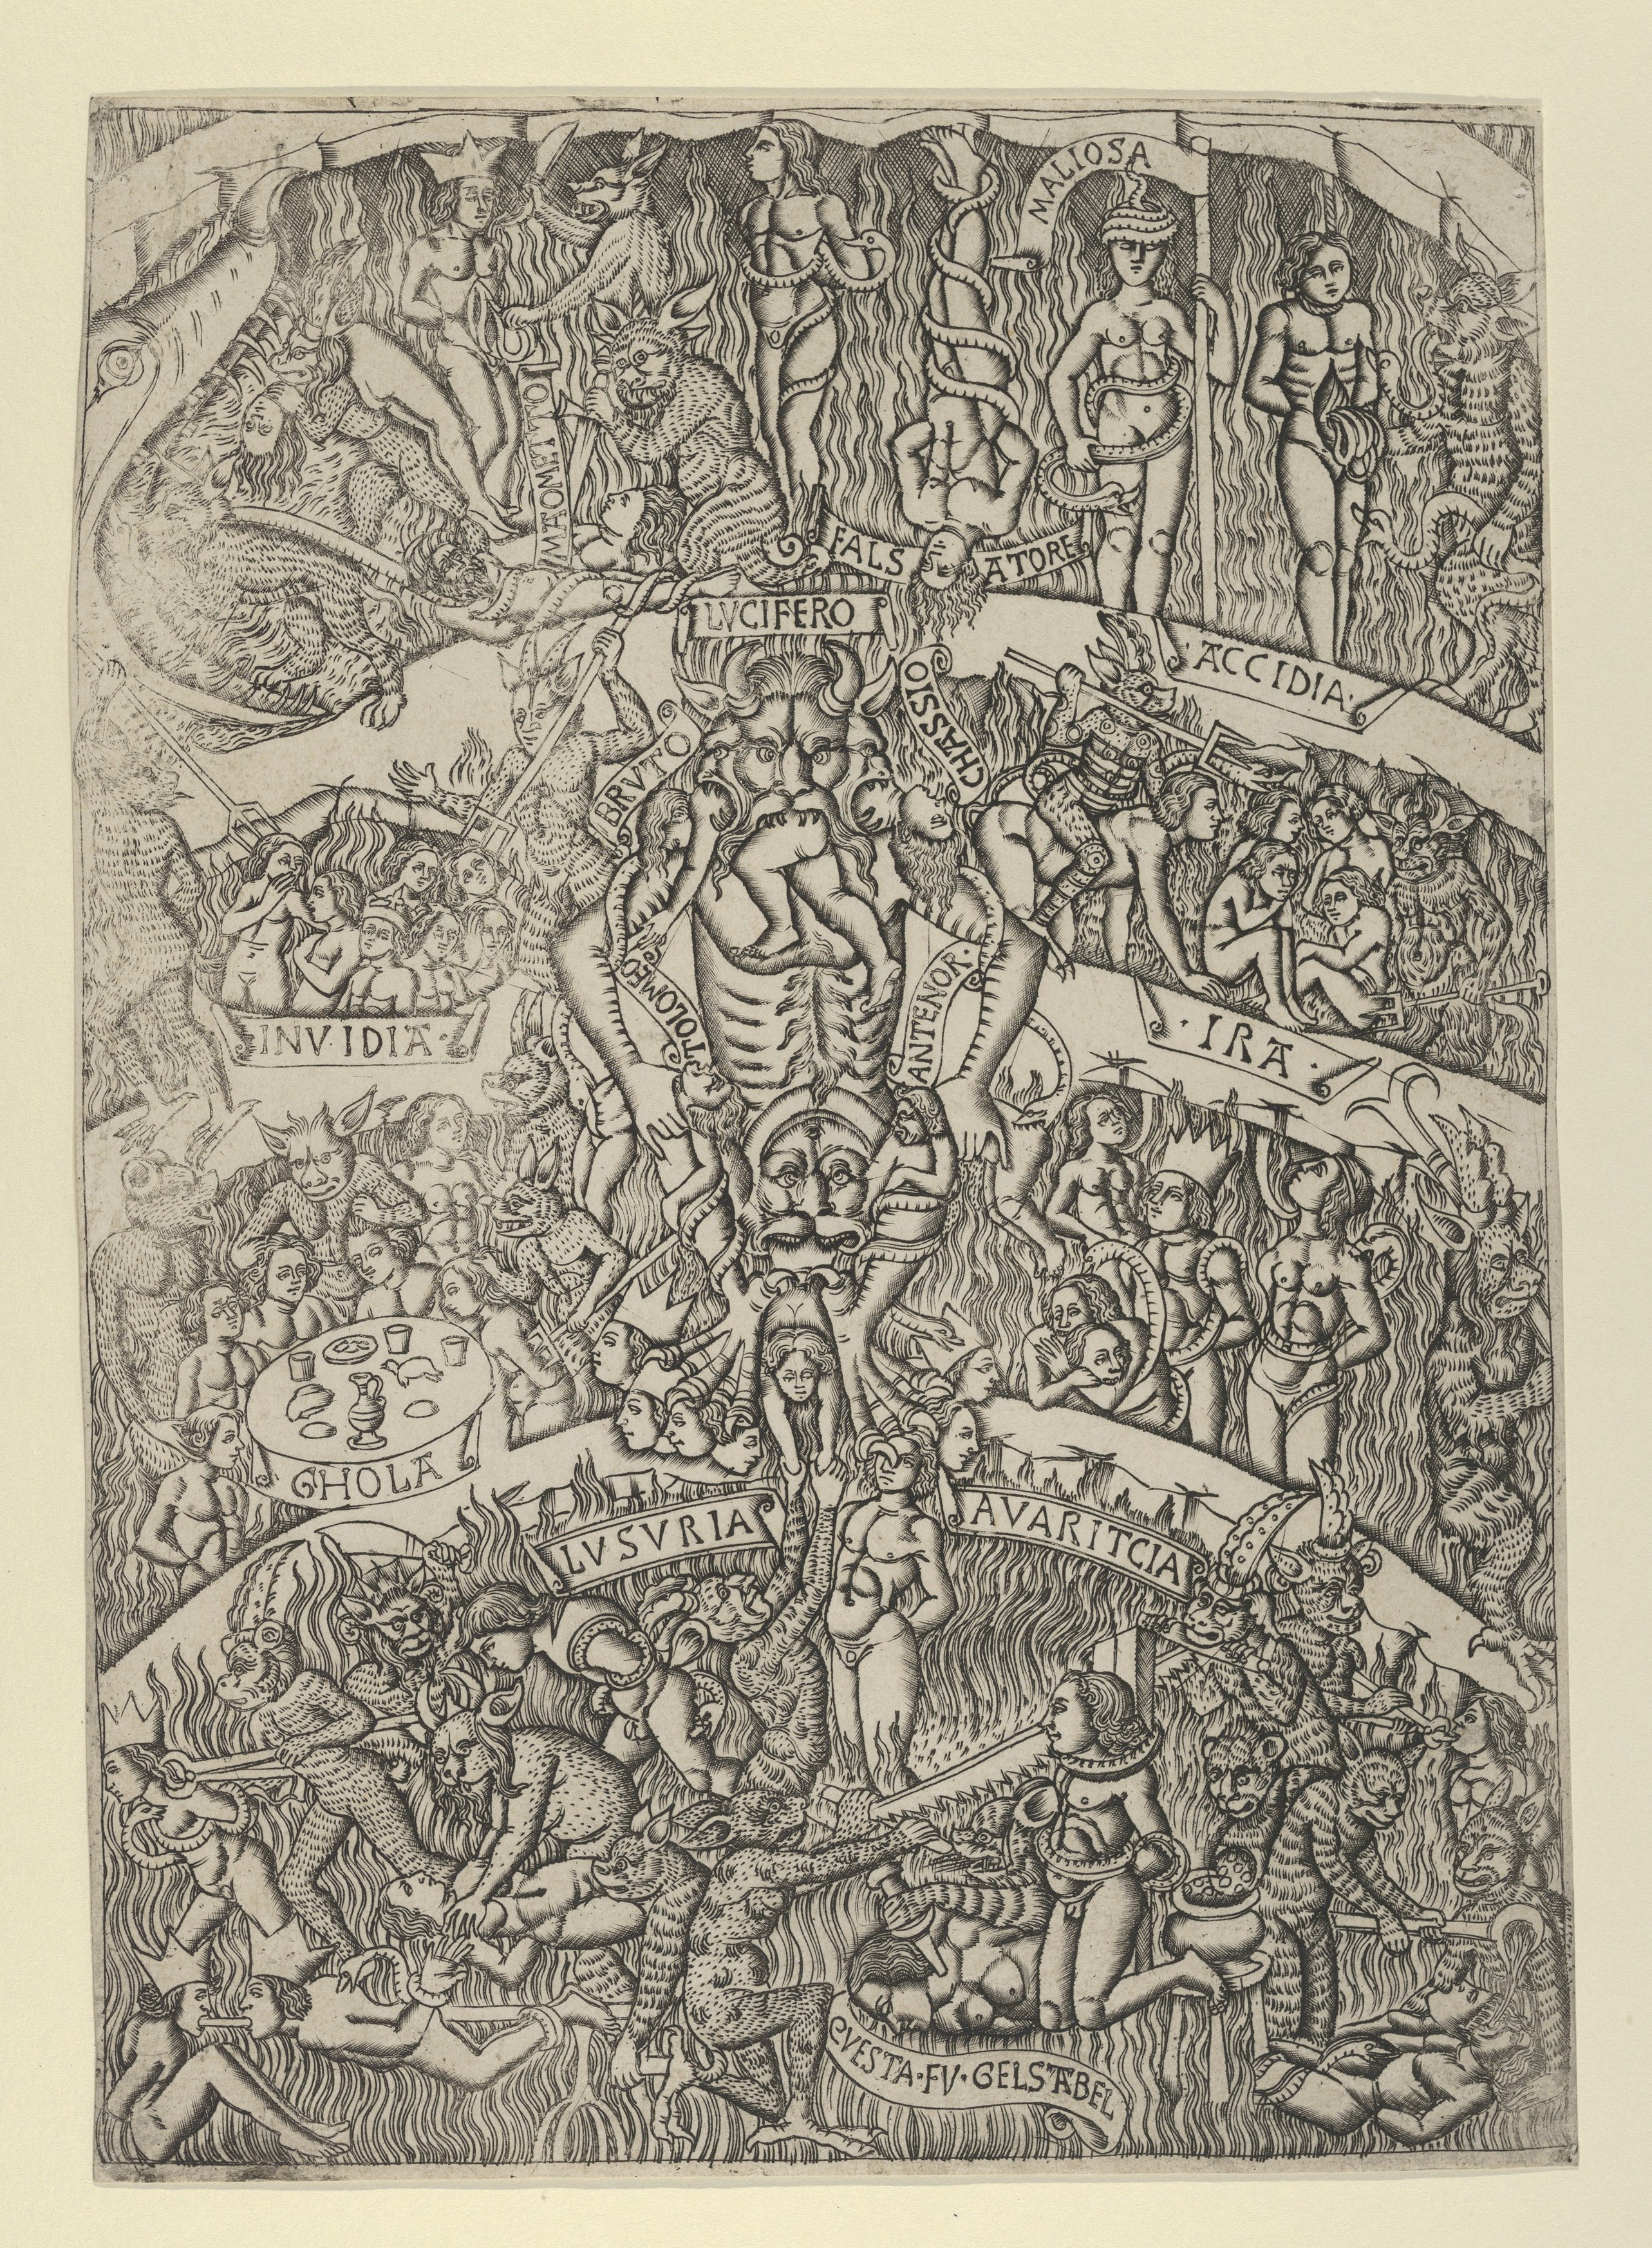 The Inferno according to Dante, after the Last Judgment fresco in the Campo Santo, Pisa, Anonymous, Italian, Florentine, 15th century, Engraving, a later re-strike (possibly 19th century)